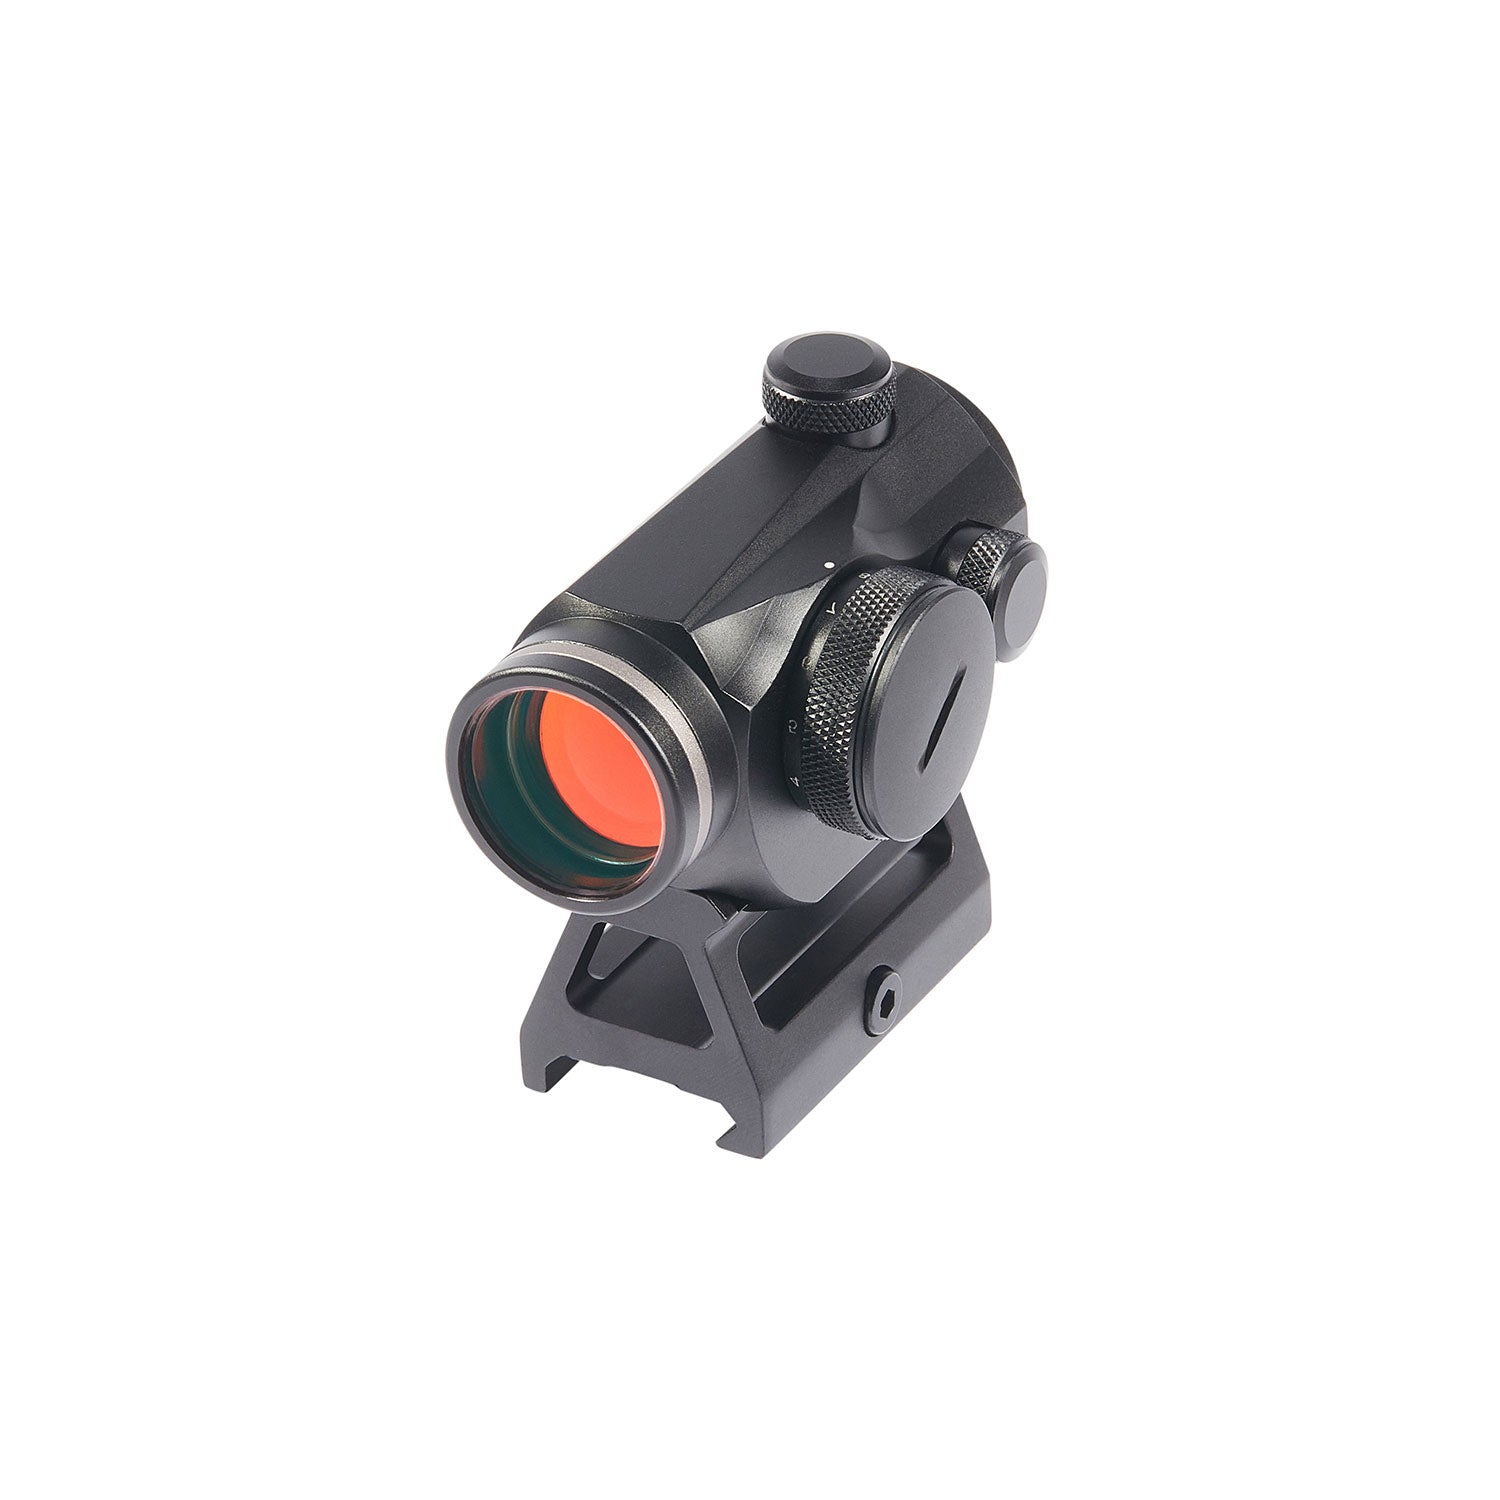 1x20 Red Dot Sight, 4.5 MOA Rifle Scope for Standard Picatinny or Weaver Rail